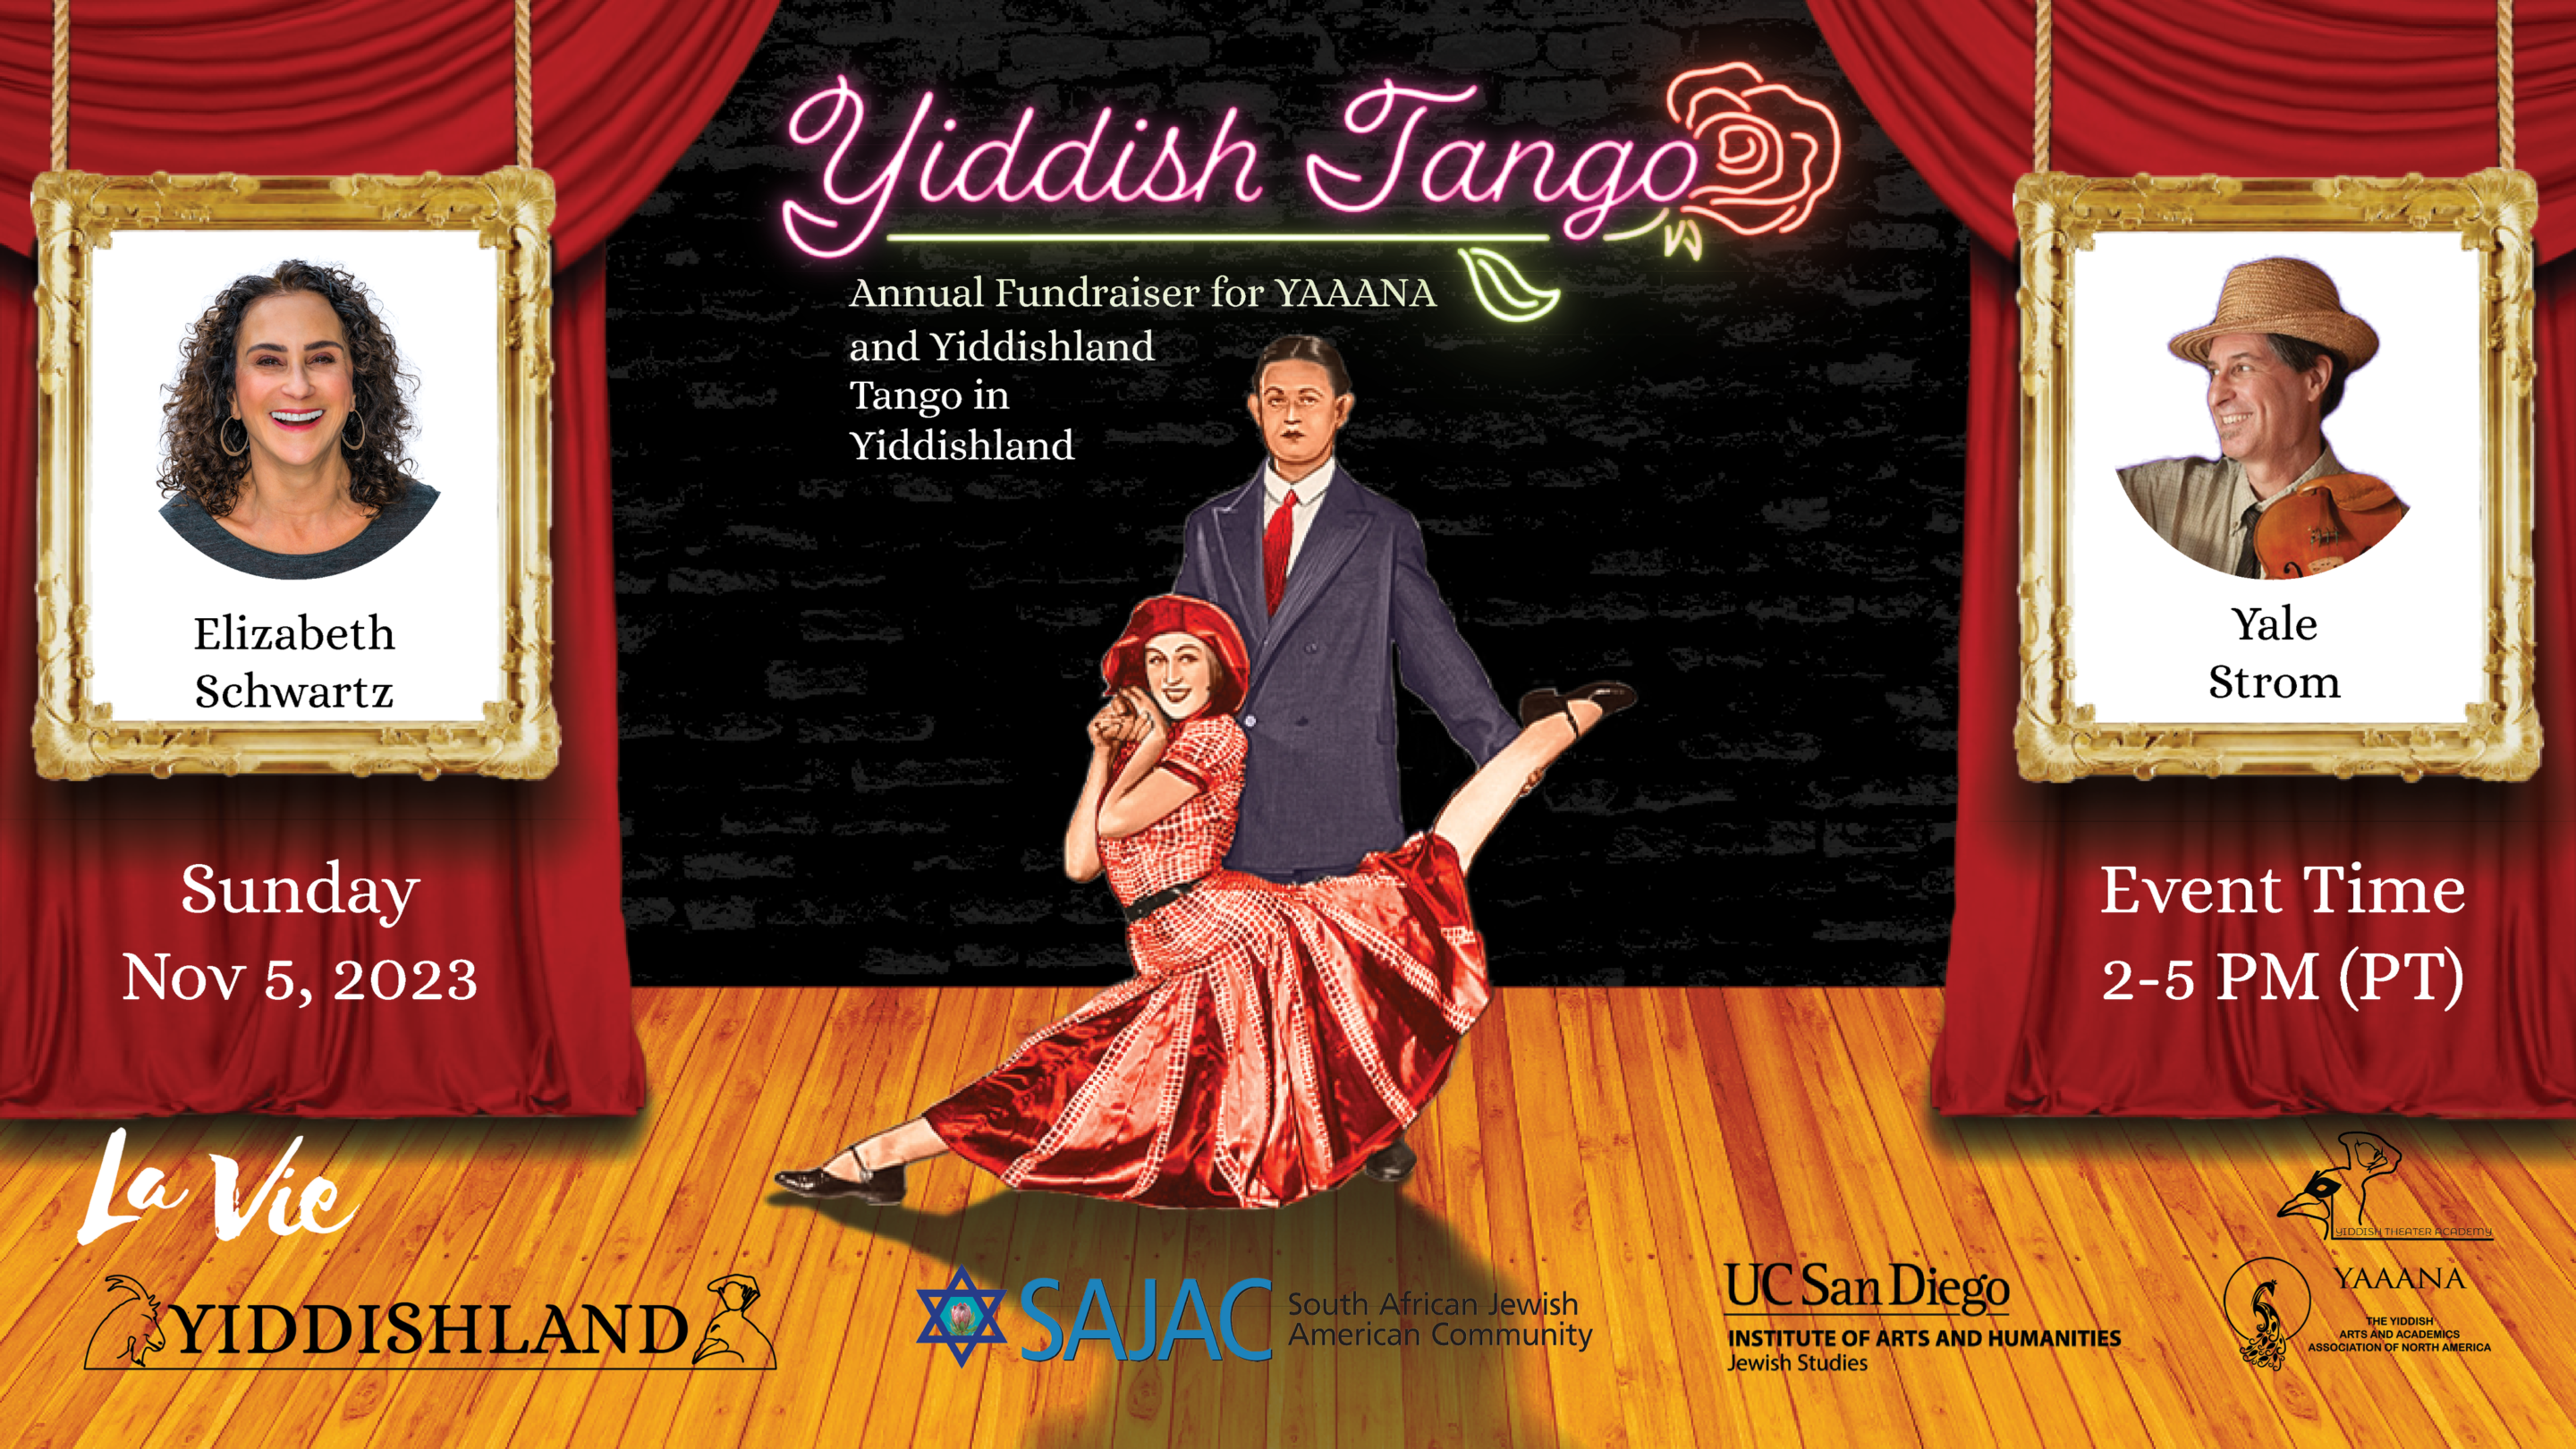 Ad for the Southern California Yiddish Summit San Diego, on November 12, 2023, from 11 am to 9 pm at Yiddishland California, La Jolla, CA